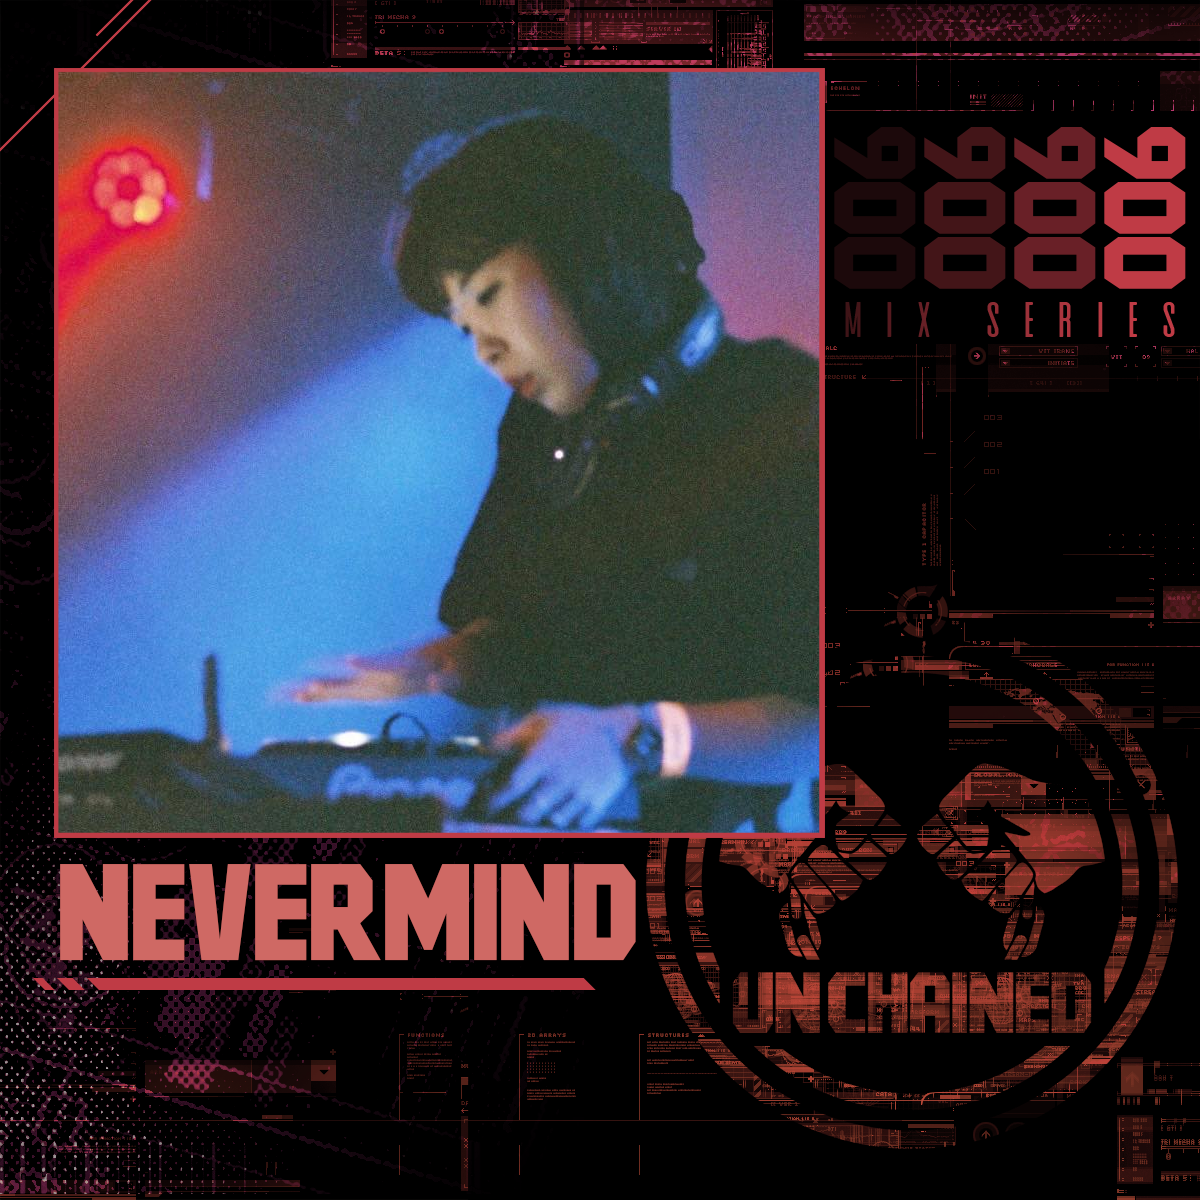 Mix Series 006 - Nevermind | Unchained Asia